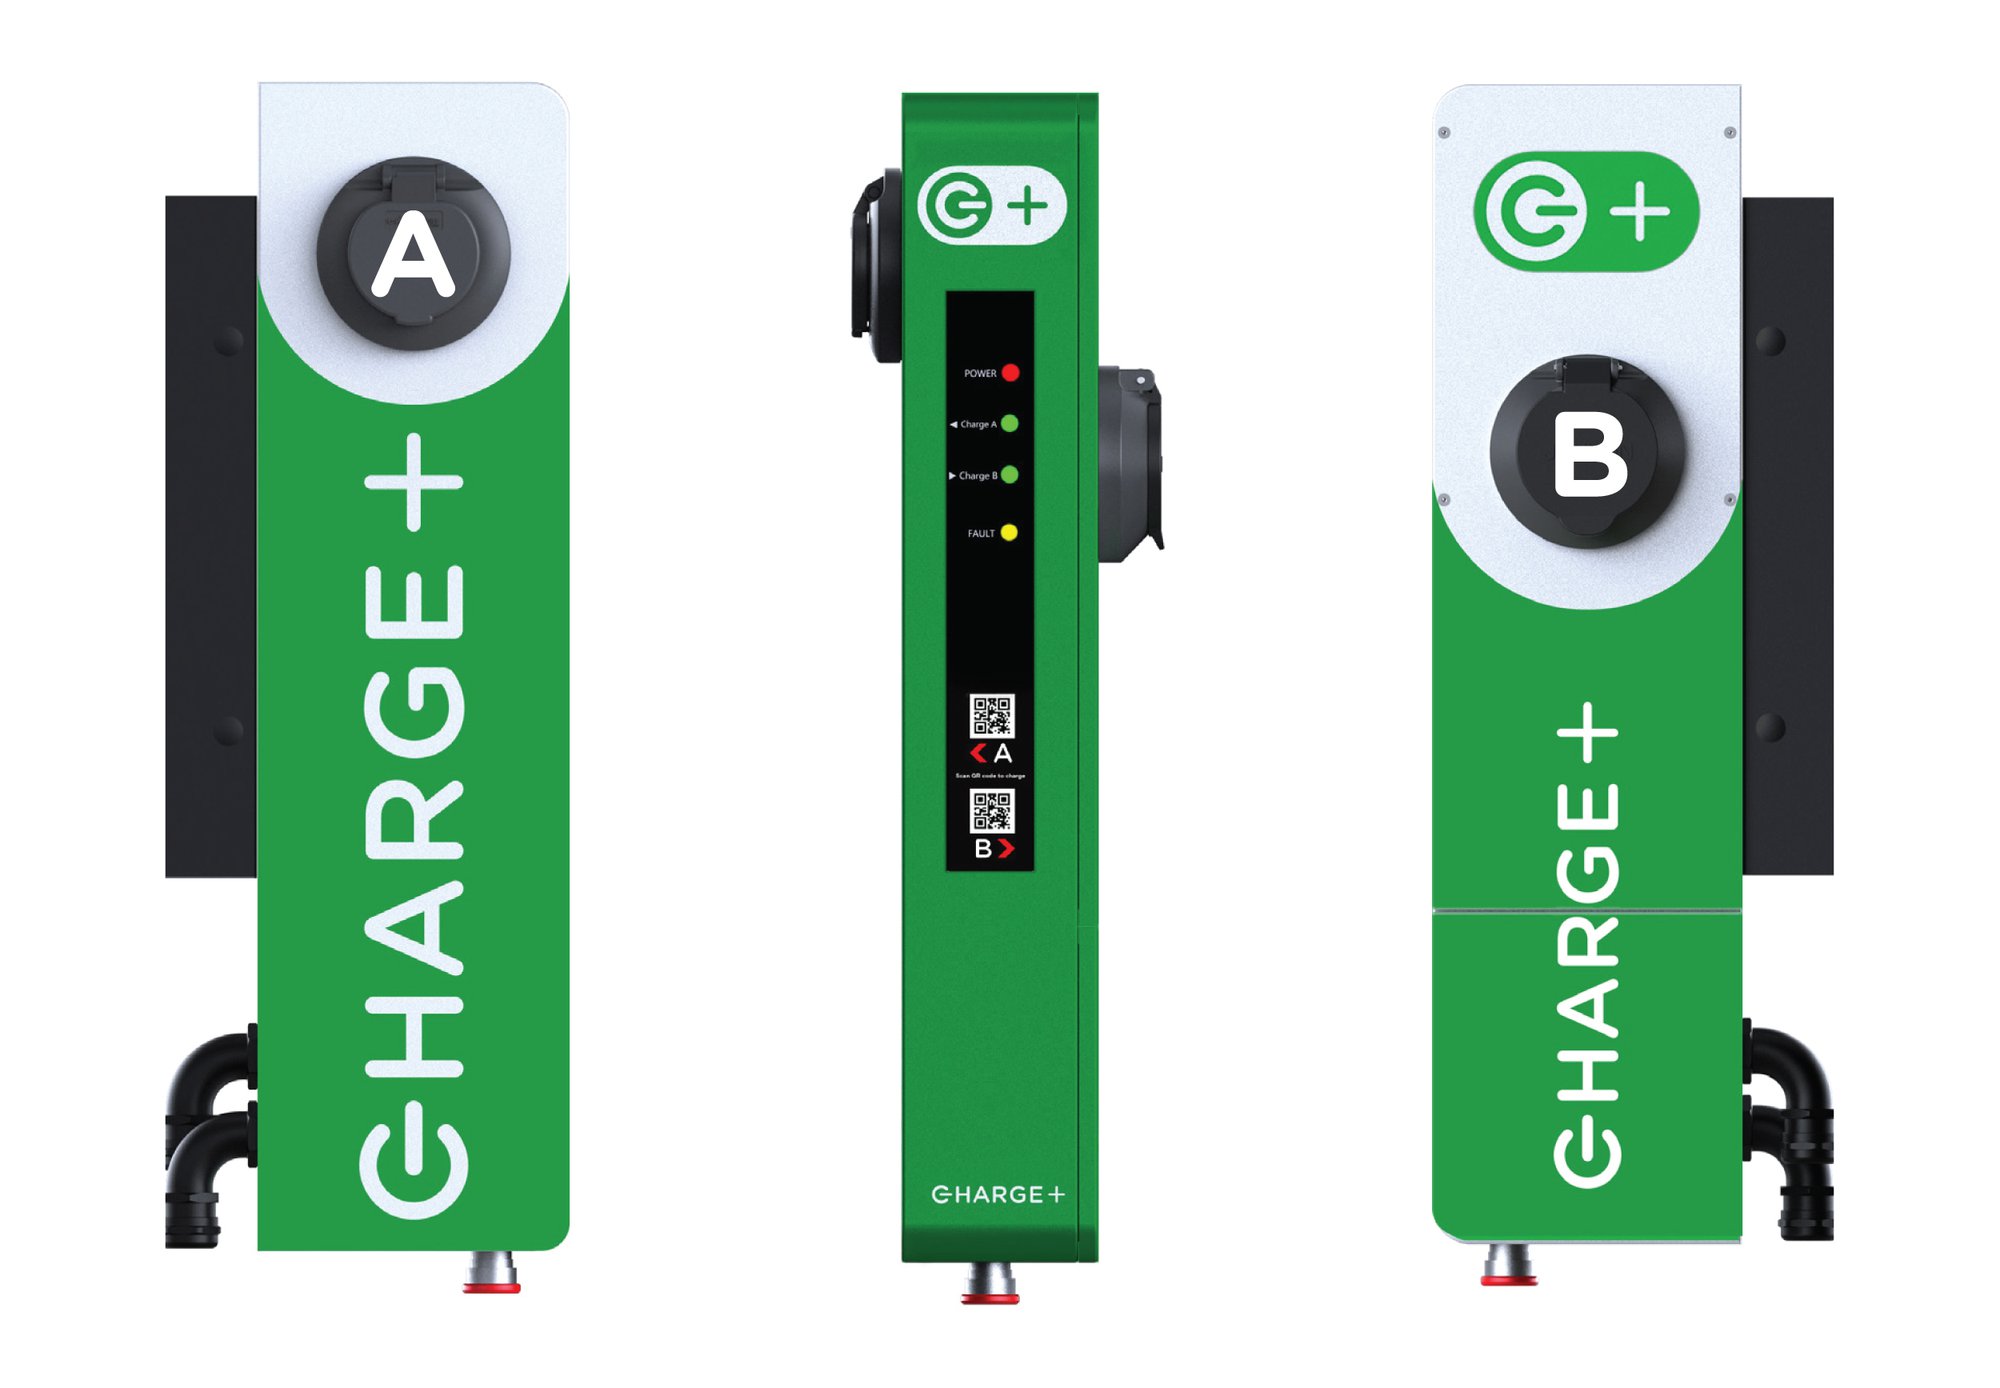 Image of Charge+